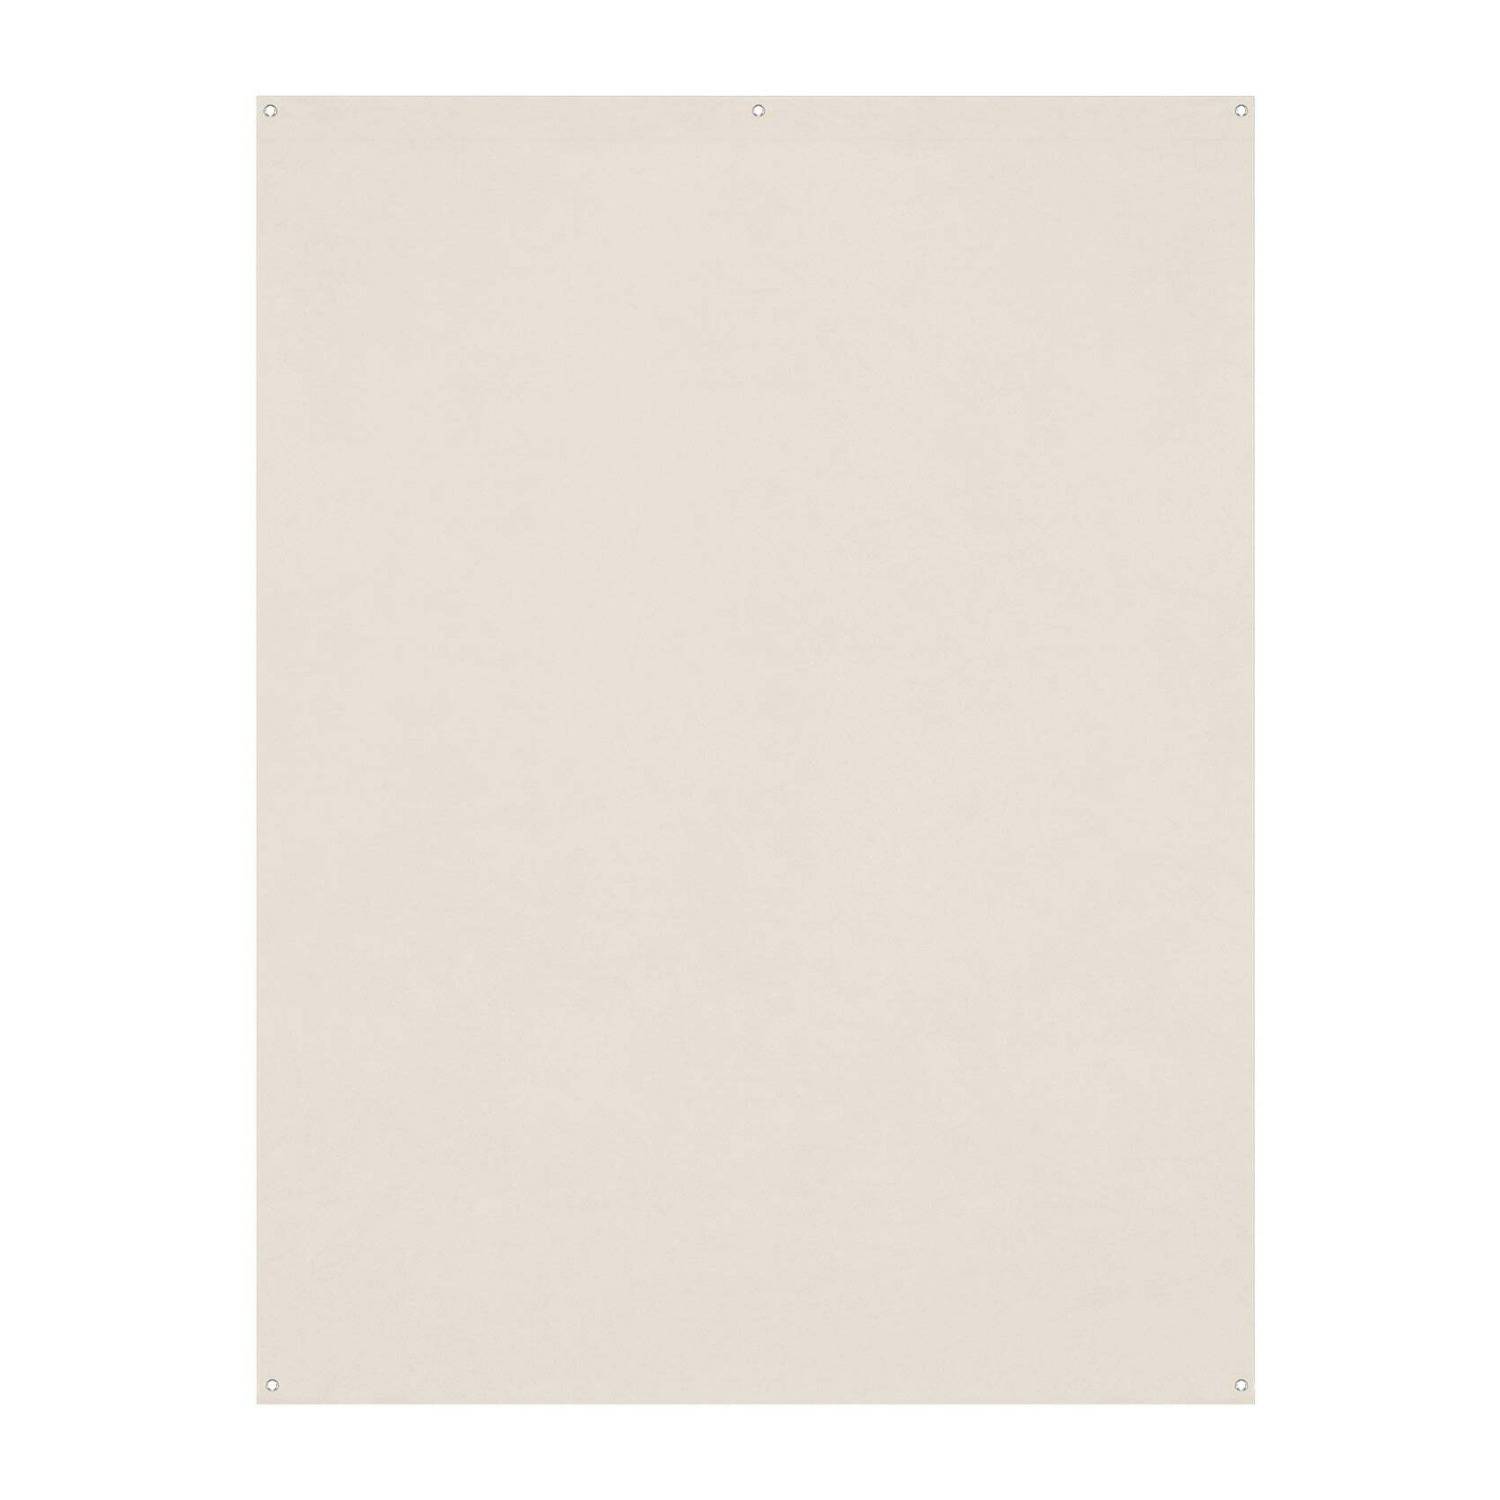 Westcott X-Drop Wrinkle-Resistant Backdrop for Video Conferencing (Buttermilk White, 5 x 7 Feet)